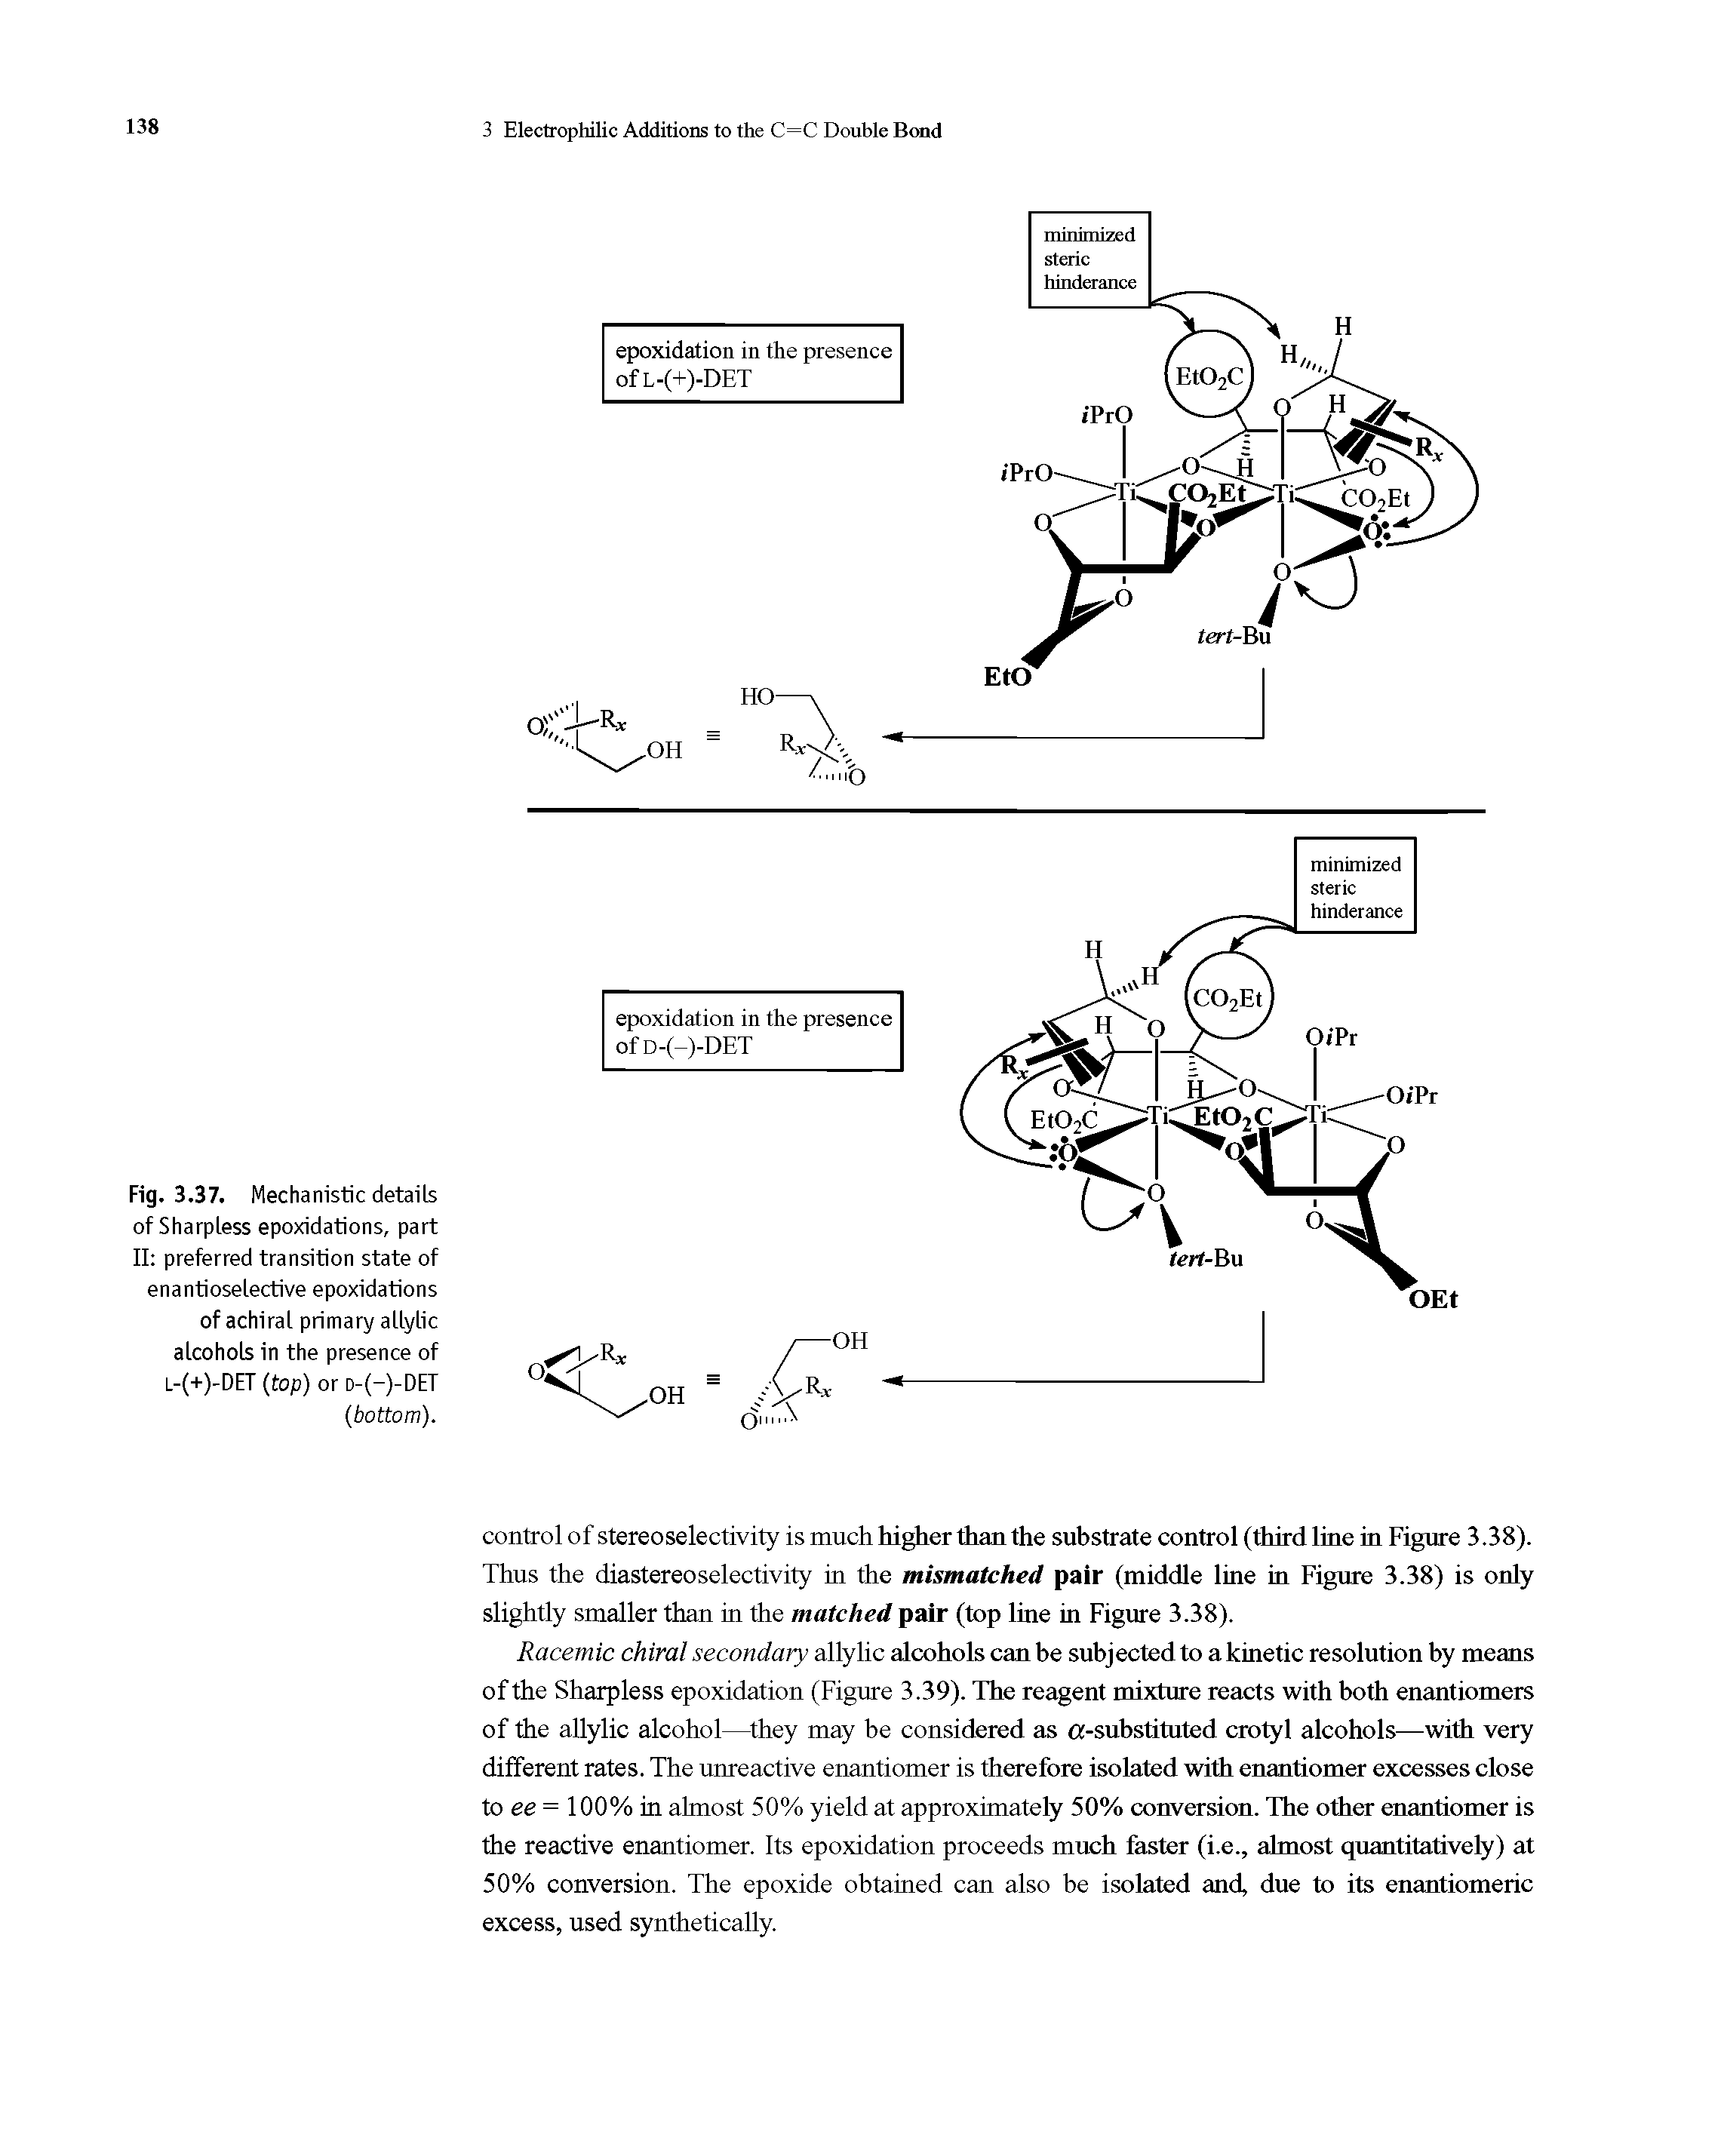 Fig. 3.37. Mechanistic details of Sharpless epoxidations, part II preferred transition state of enantioselective epoxidations of achiral primary allylic alcohols in the presence of l-(+)-DET (top) or d-(-)-DET (bottom).